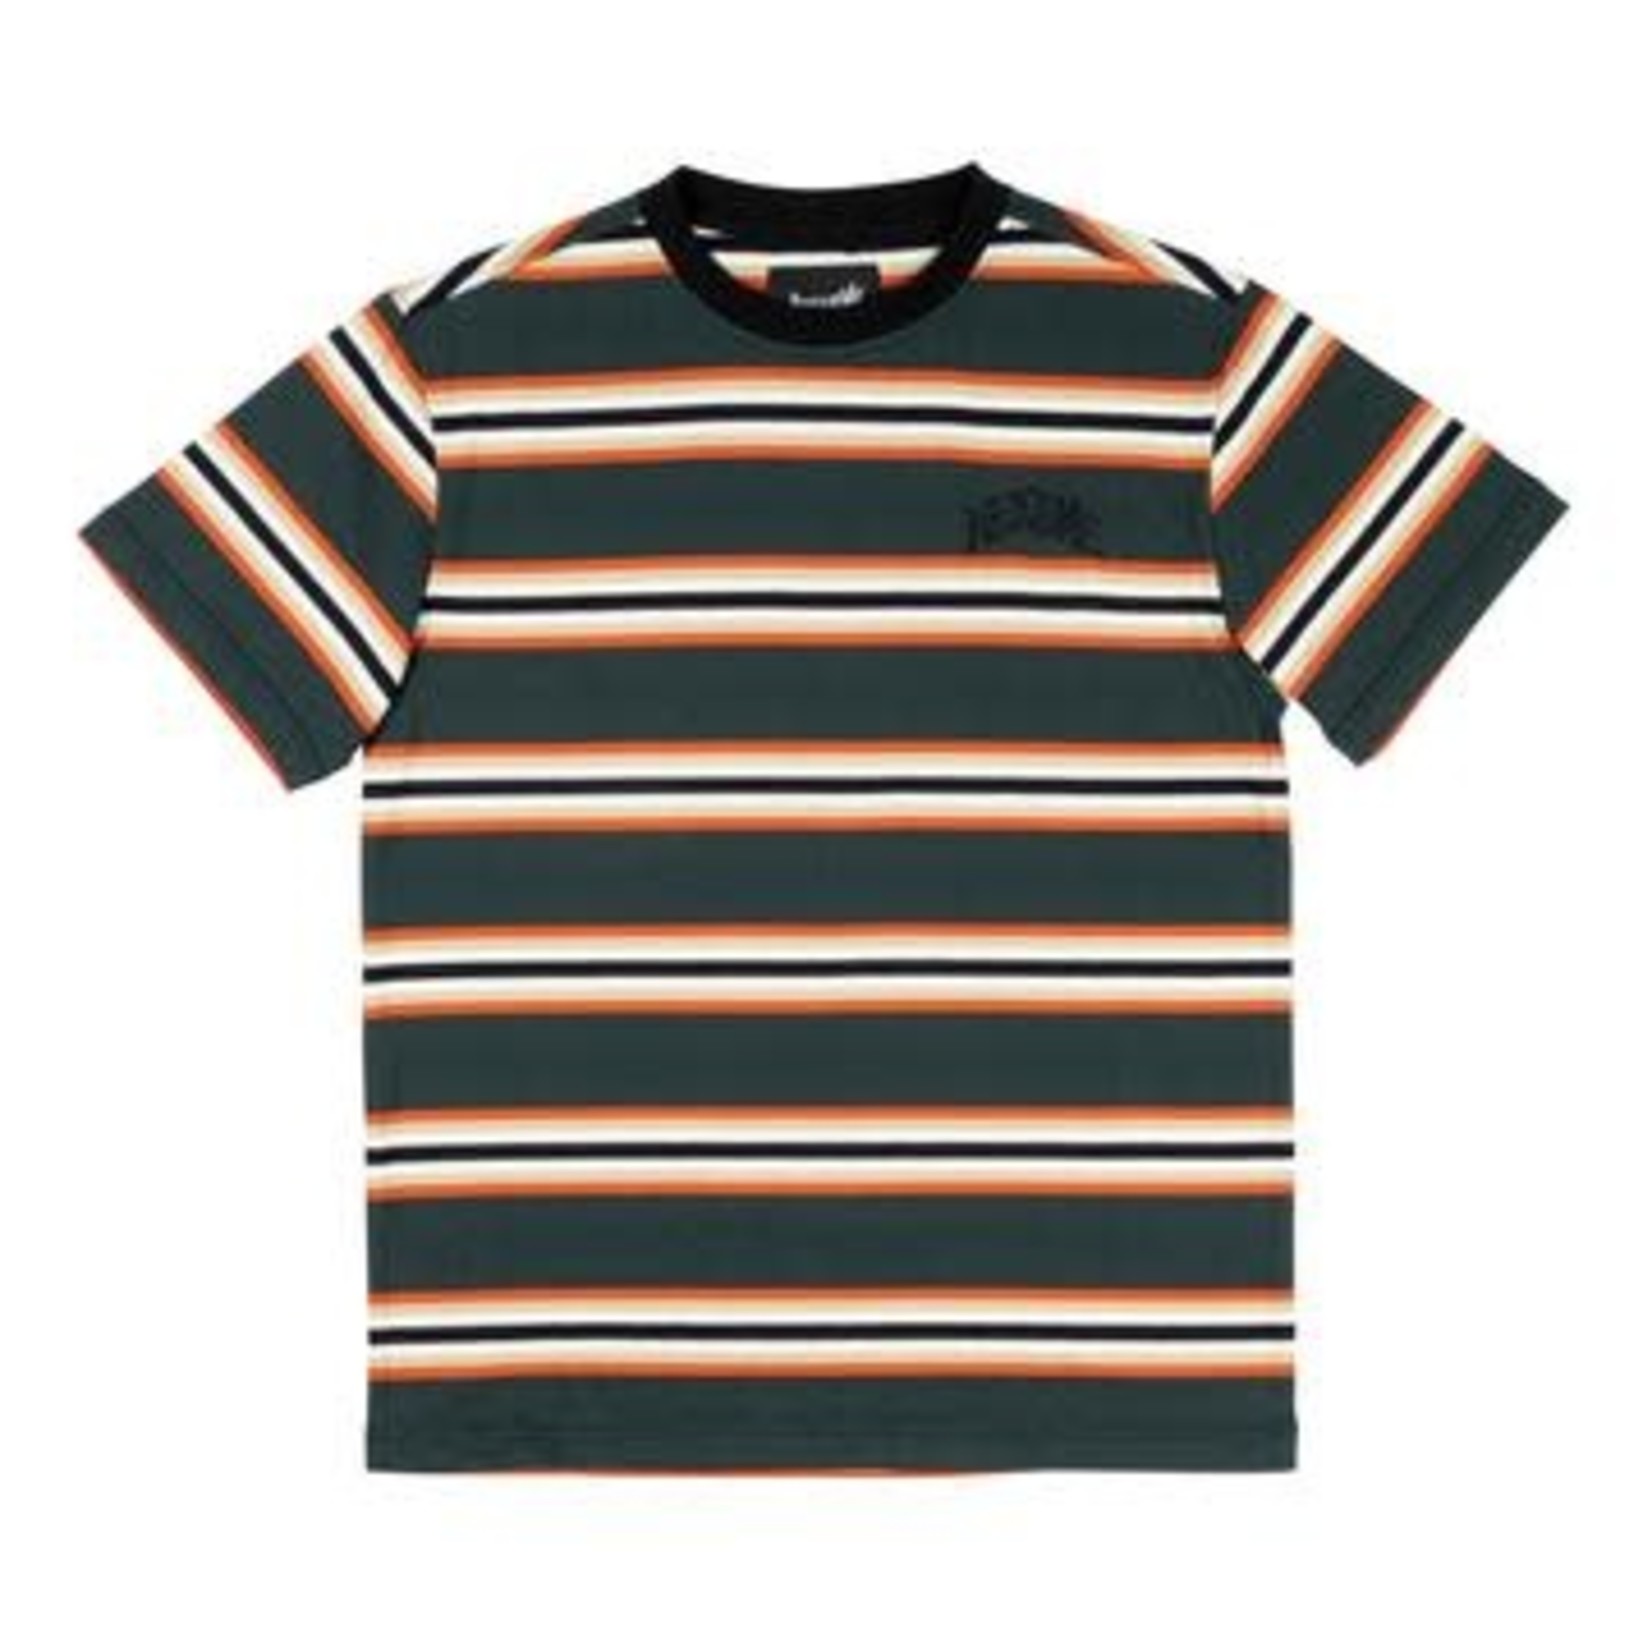 Welcome Skateboards Welcome Thelma Stripe Short Sleeve Crew Shirt - Spruce